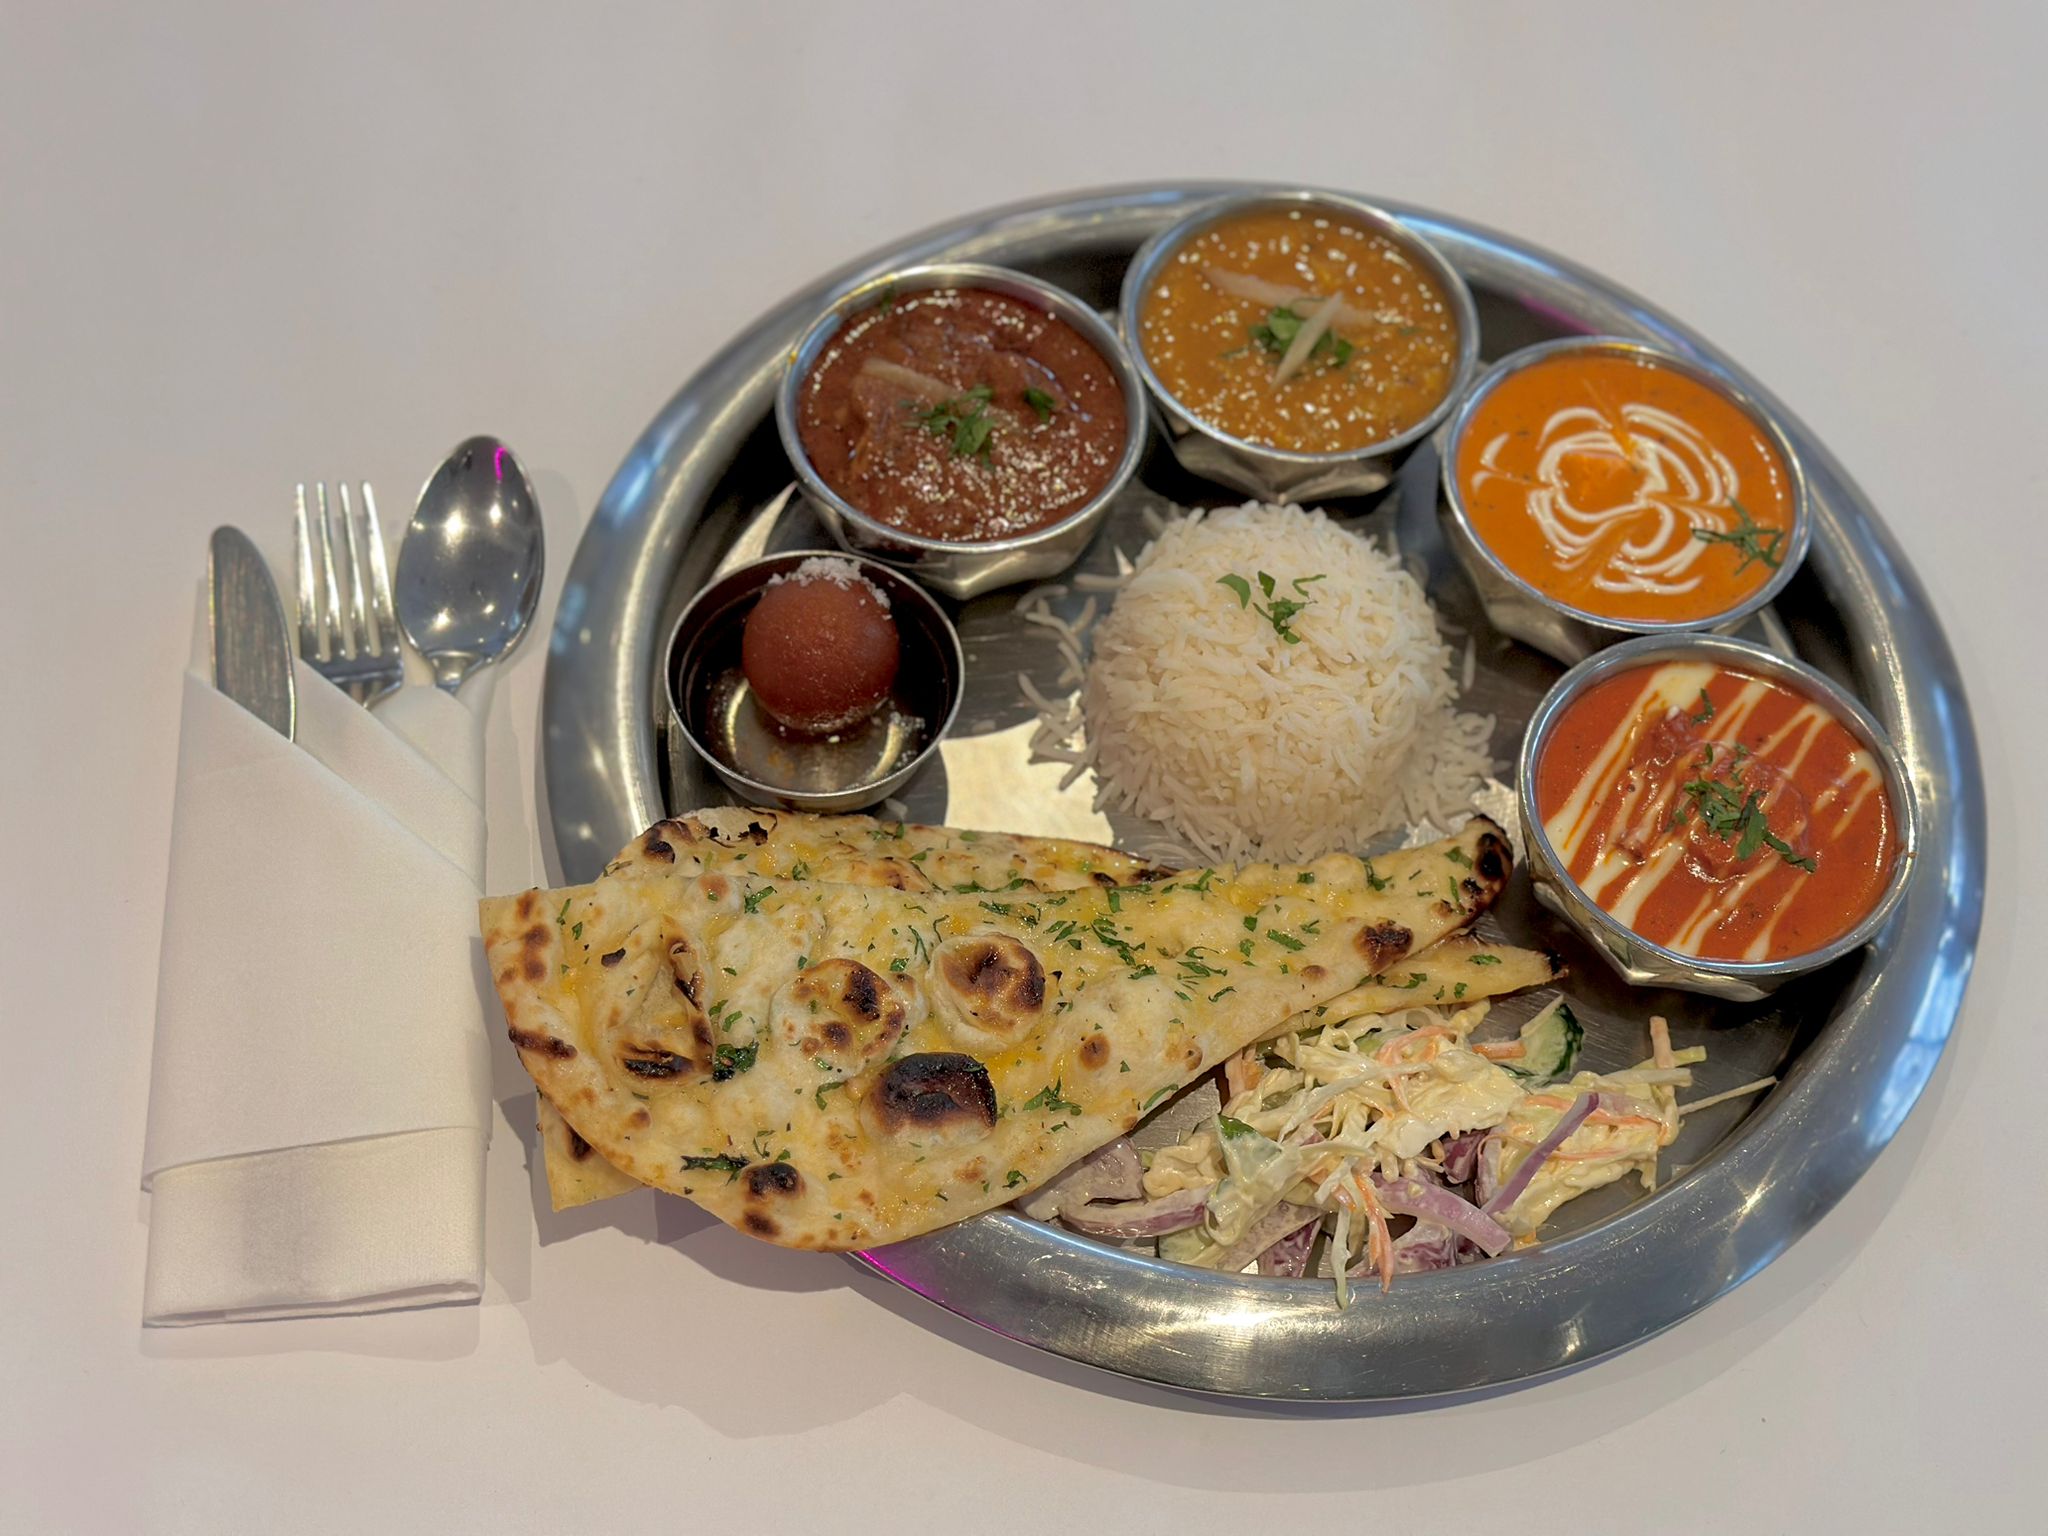 Experience The Joy Of Festivals With Great Food At Asees Indian Restaurant